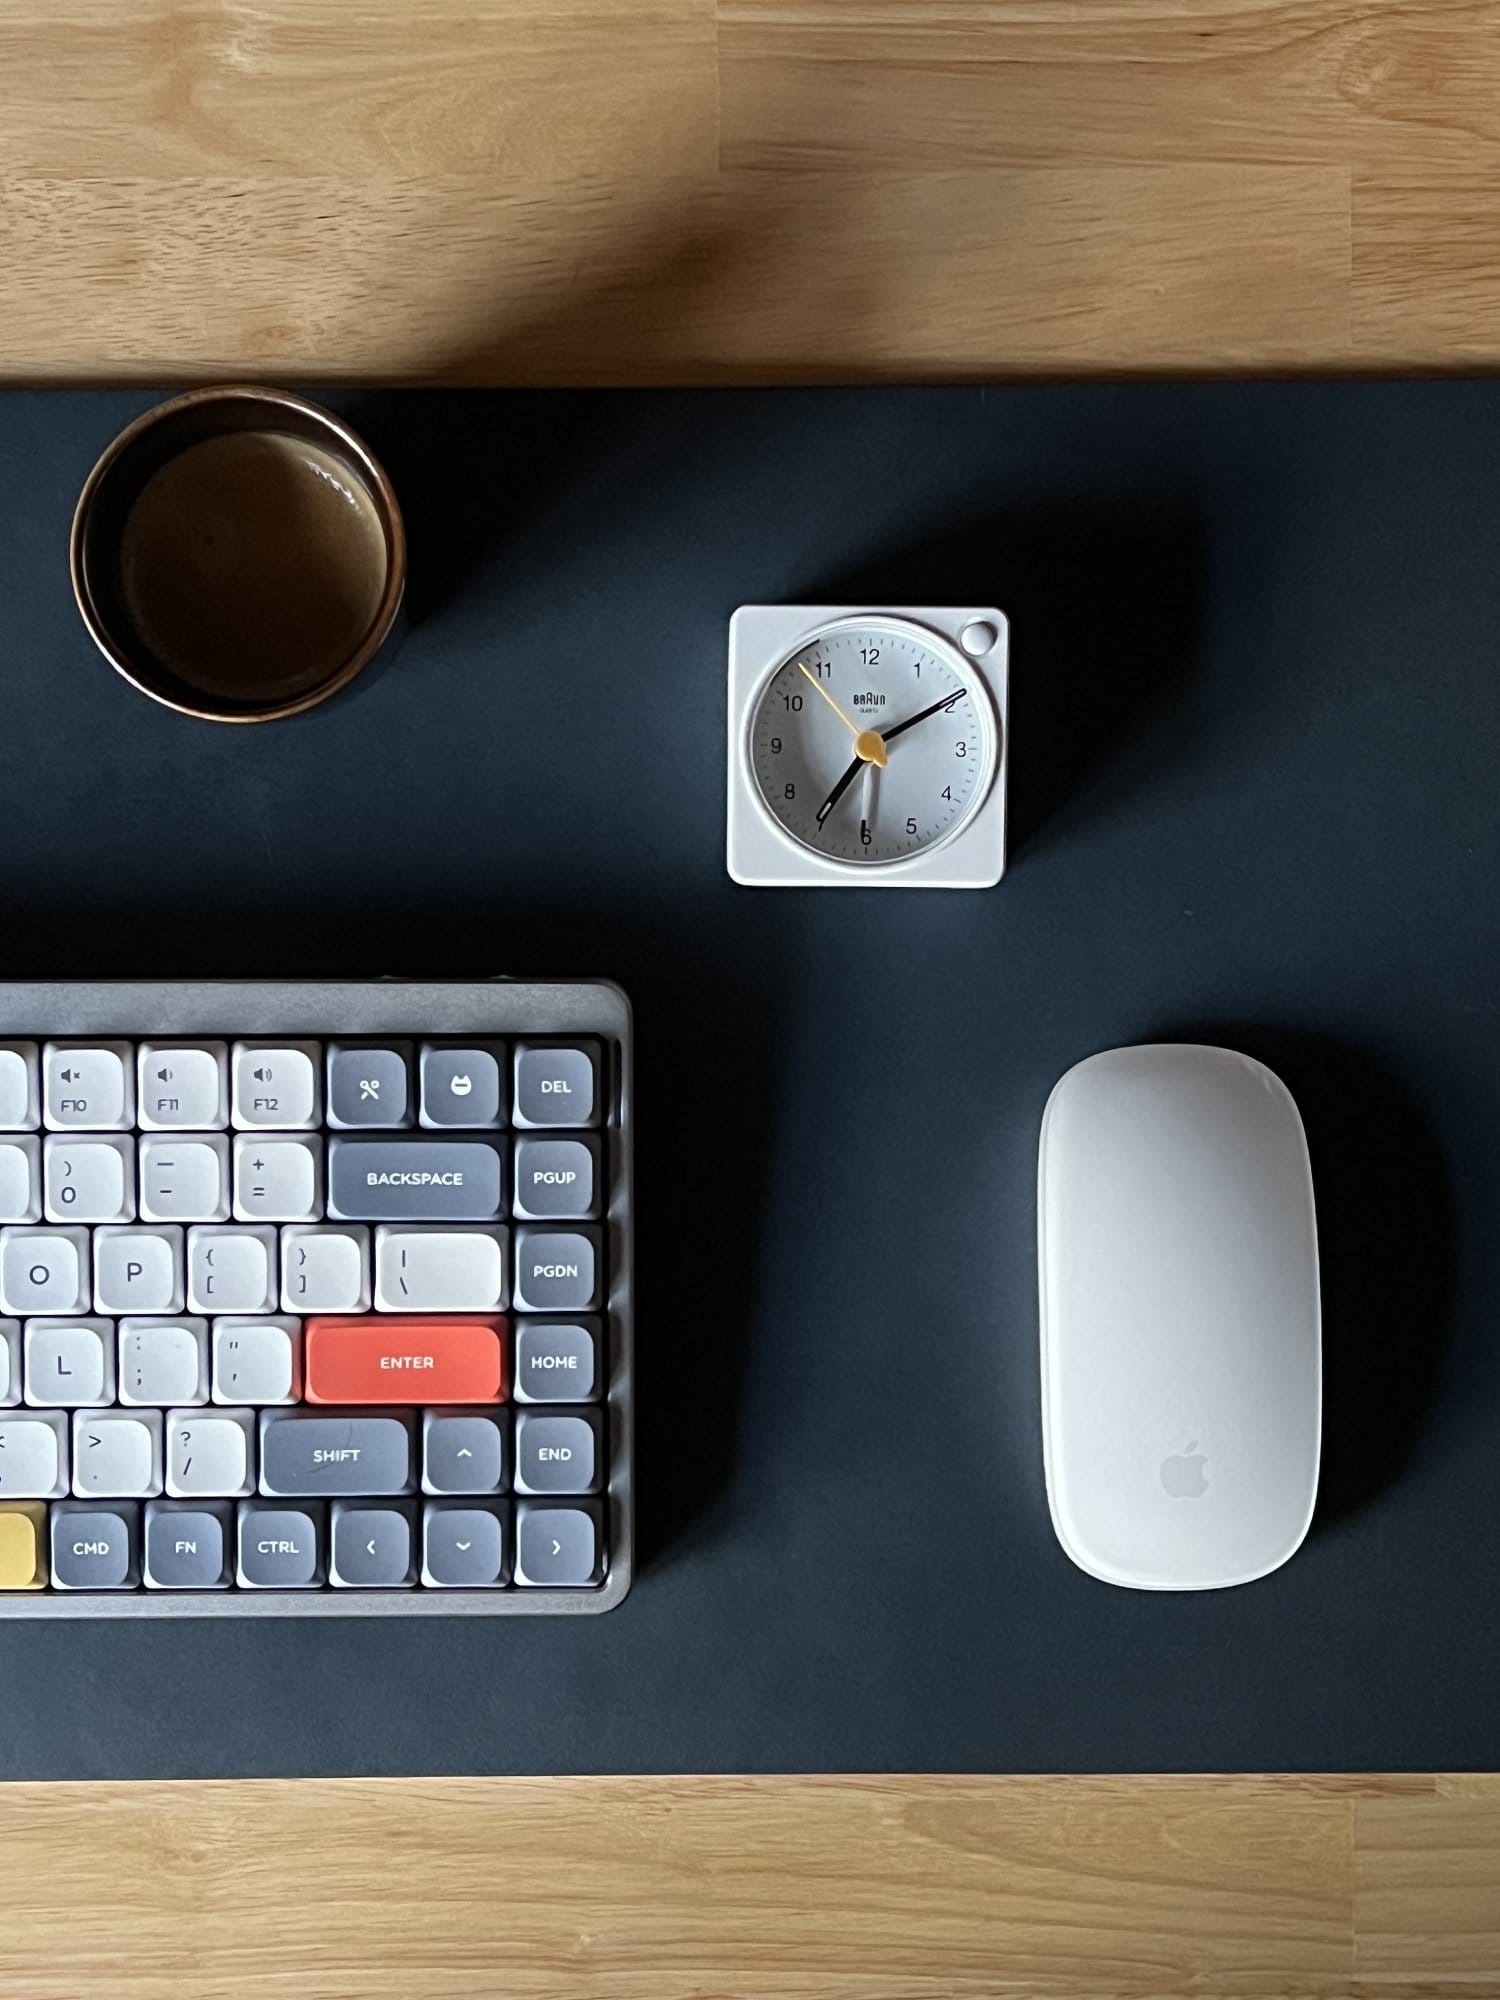  An overhead view of a desk with a classic mechanical keyboard, a white analog clock, a coffee cup, and an Apple mouse, all arranged on a dark mat